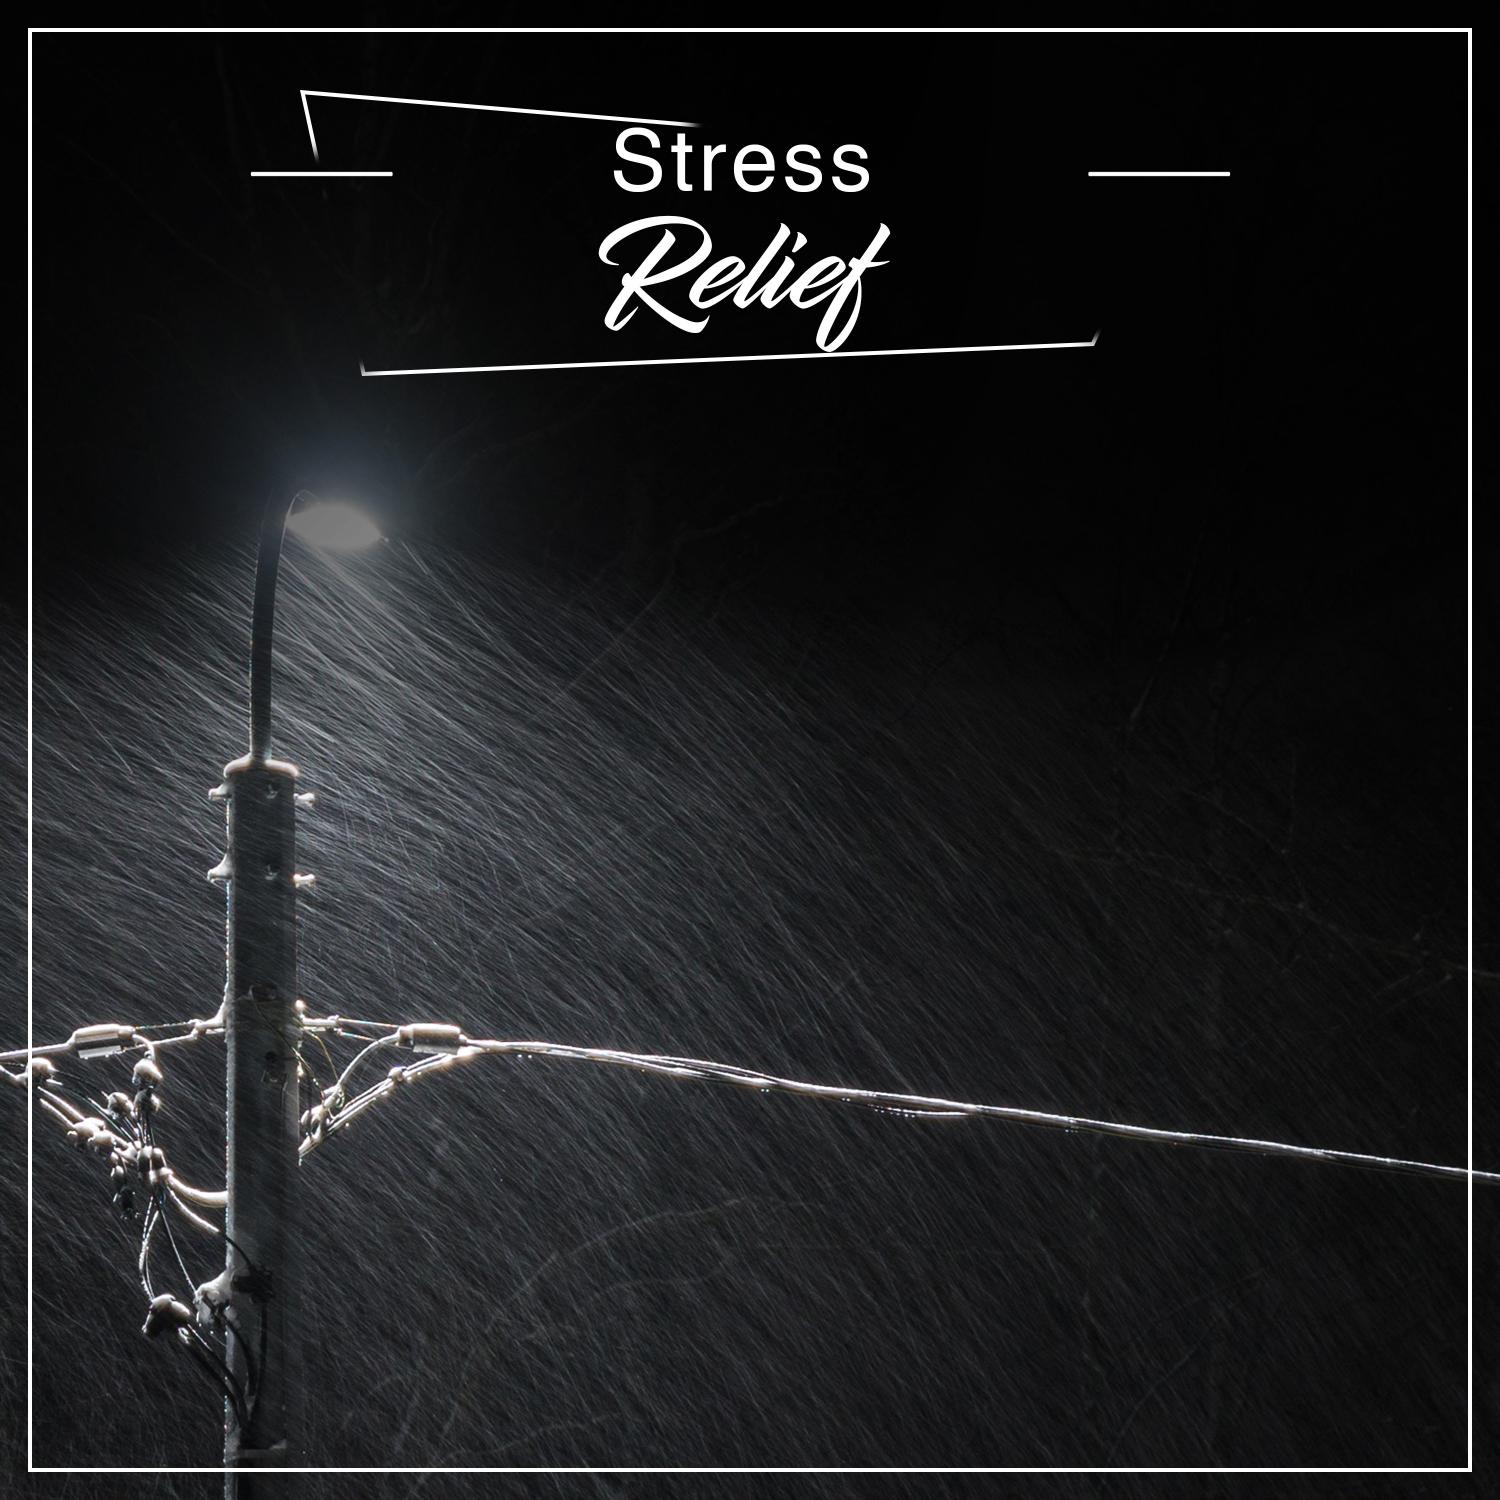 18 Mood Uplifting Songs to Relieve Stress